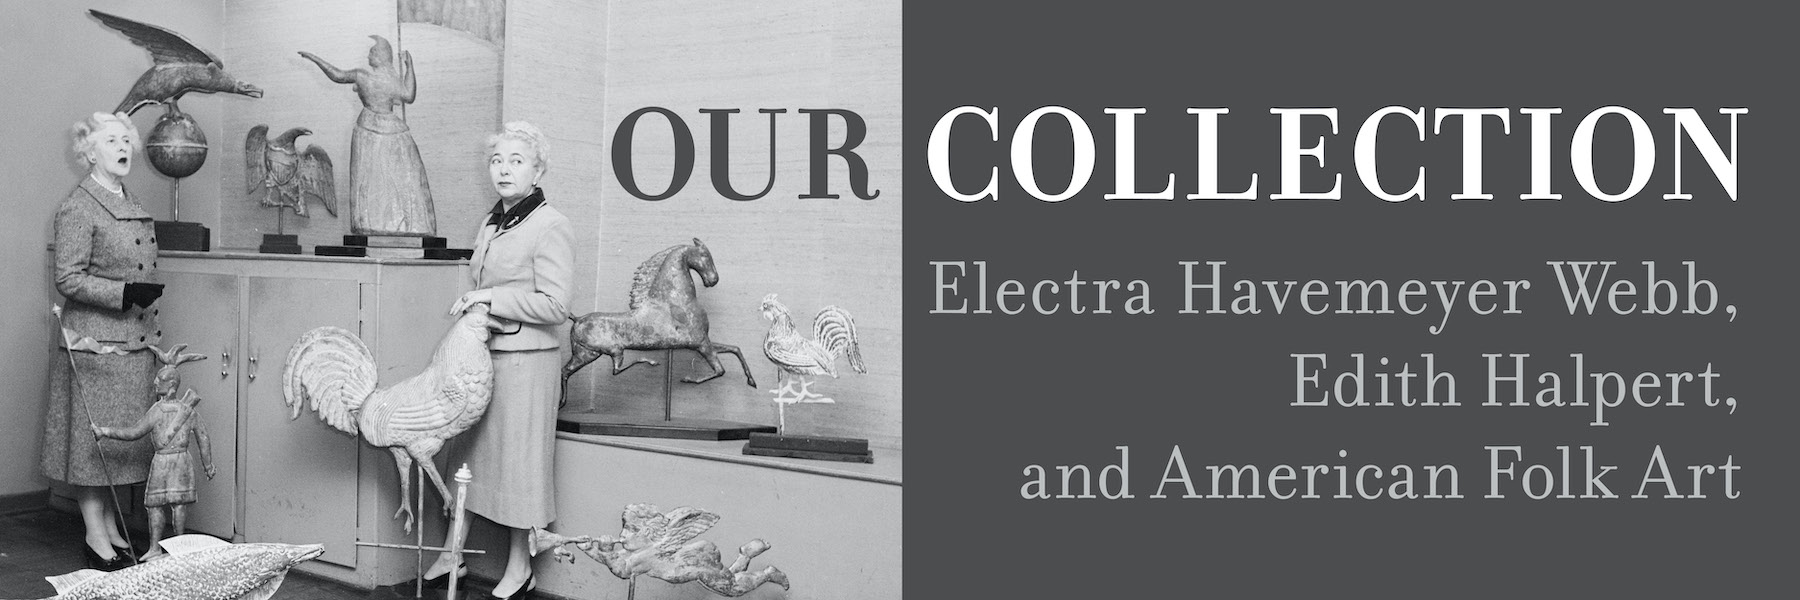 Online Exhibition "Our Collection: Electra Havemeyer Webb, Edith Halpert, and American Folk Art"" 